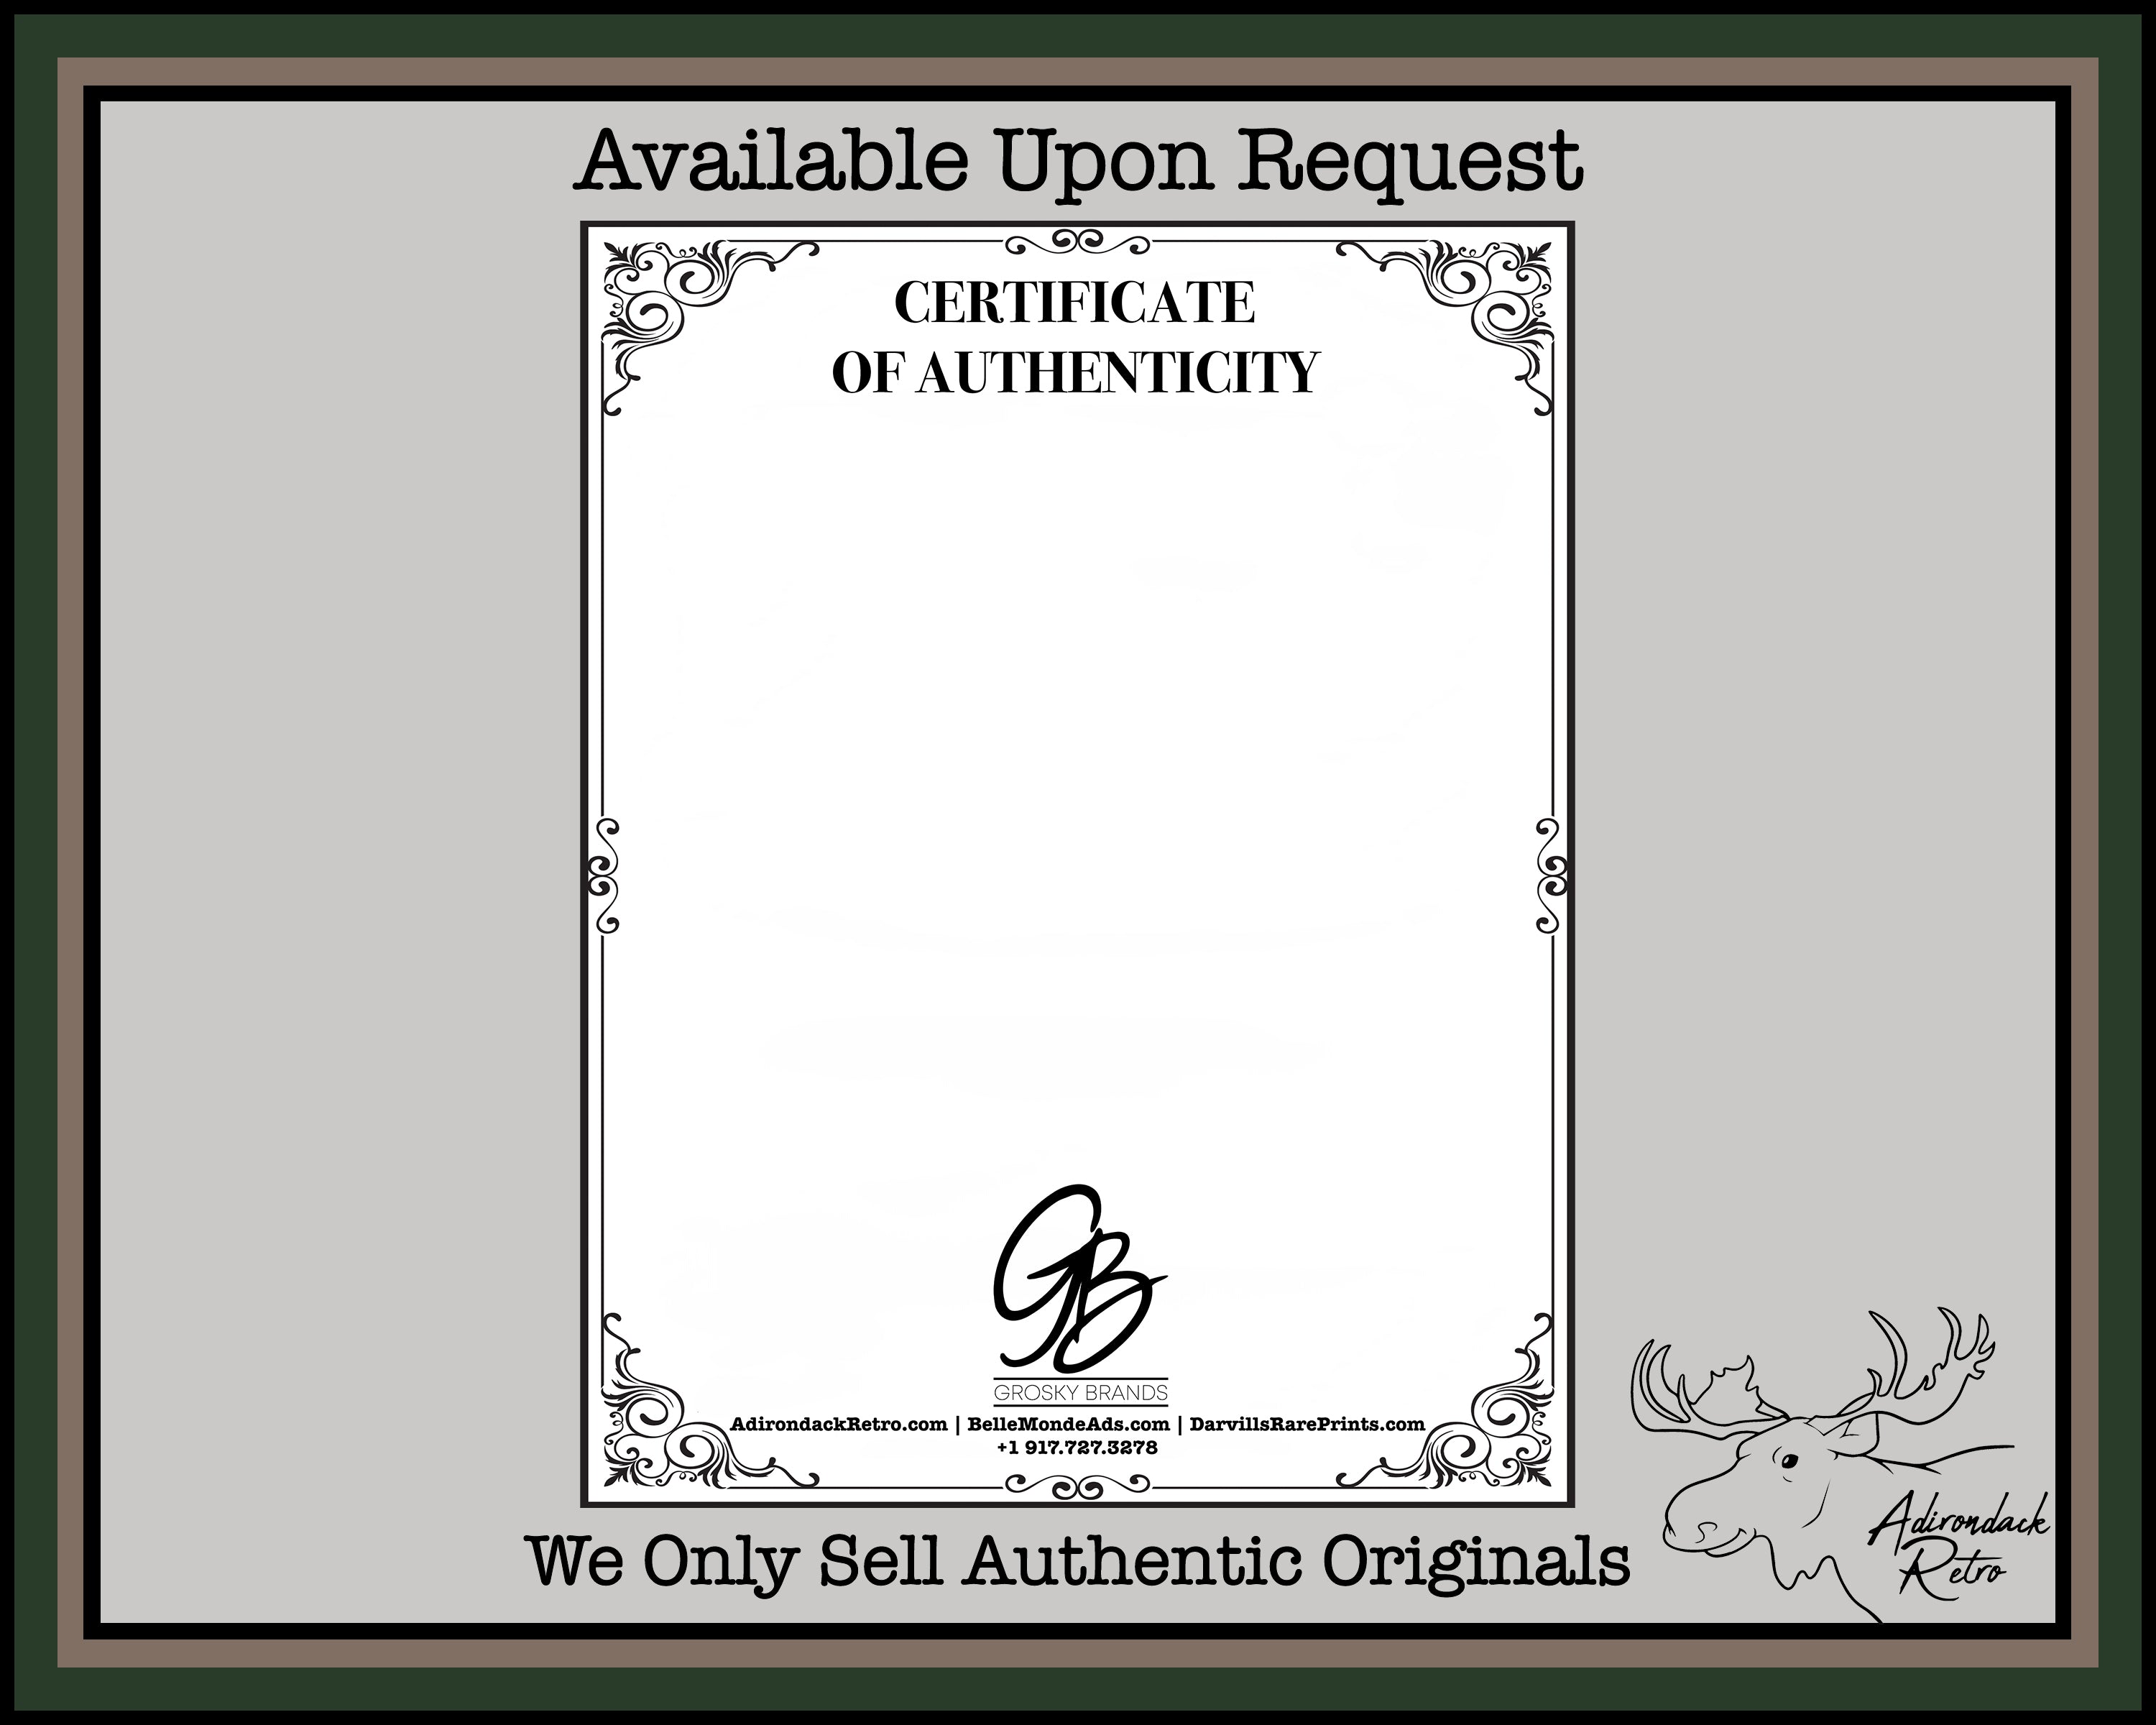 Grosky Brands Certificate Of Authenticity Sample